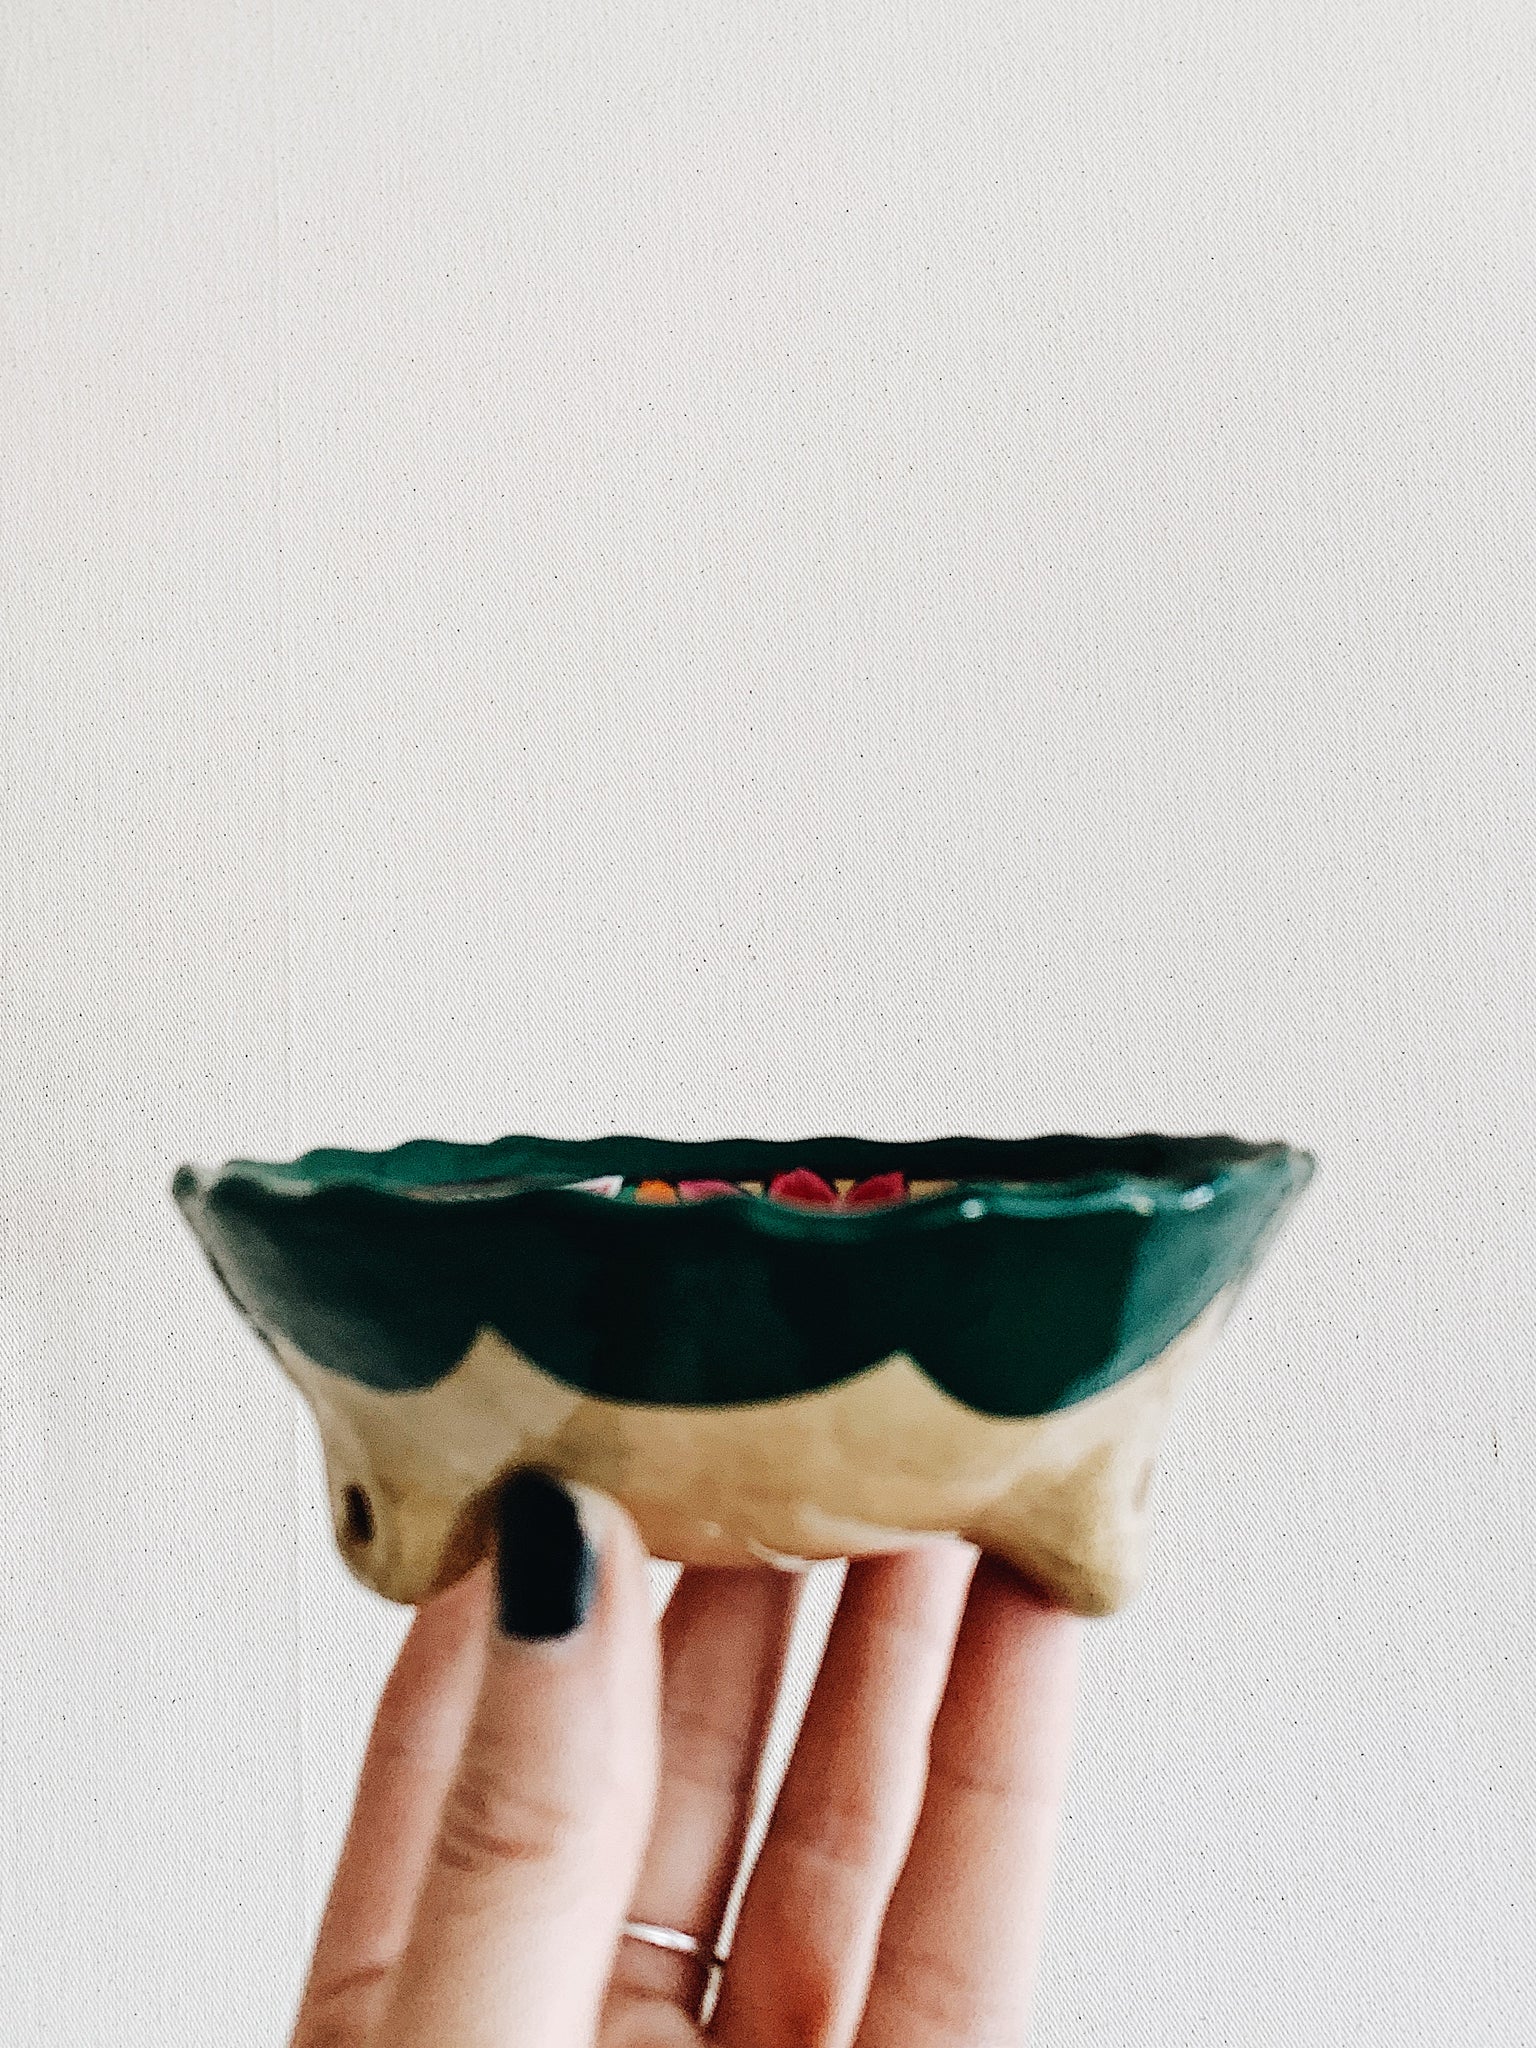 Hand Painted Footed Clay Dish